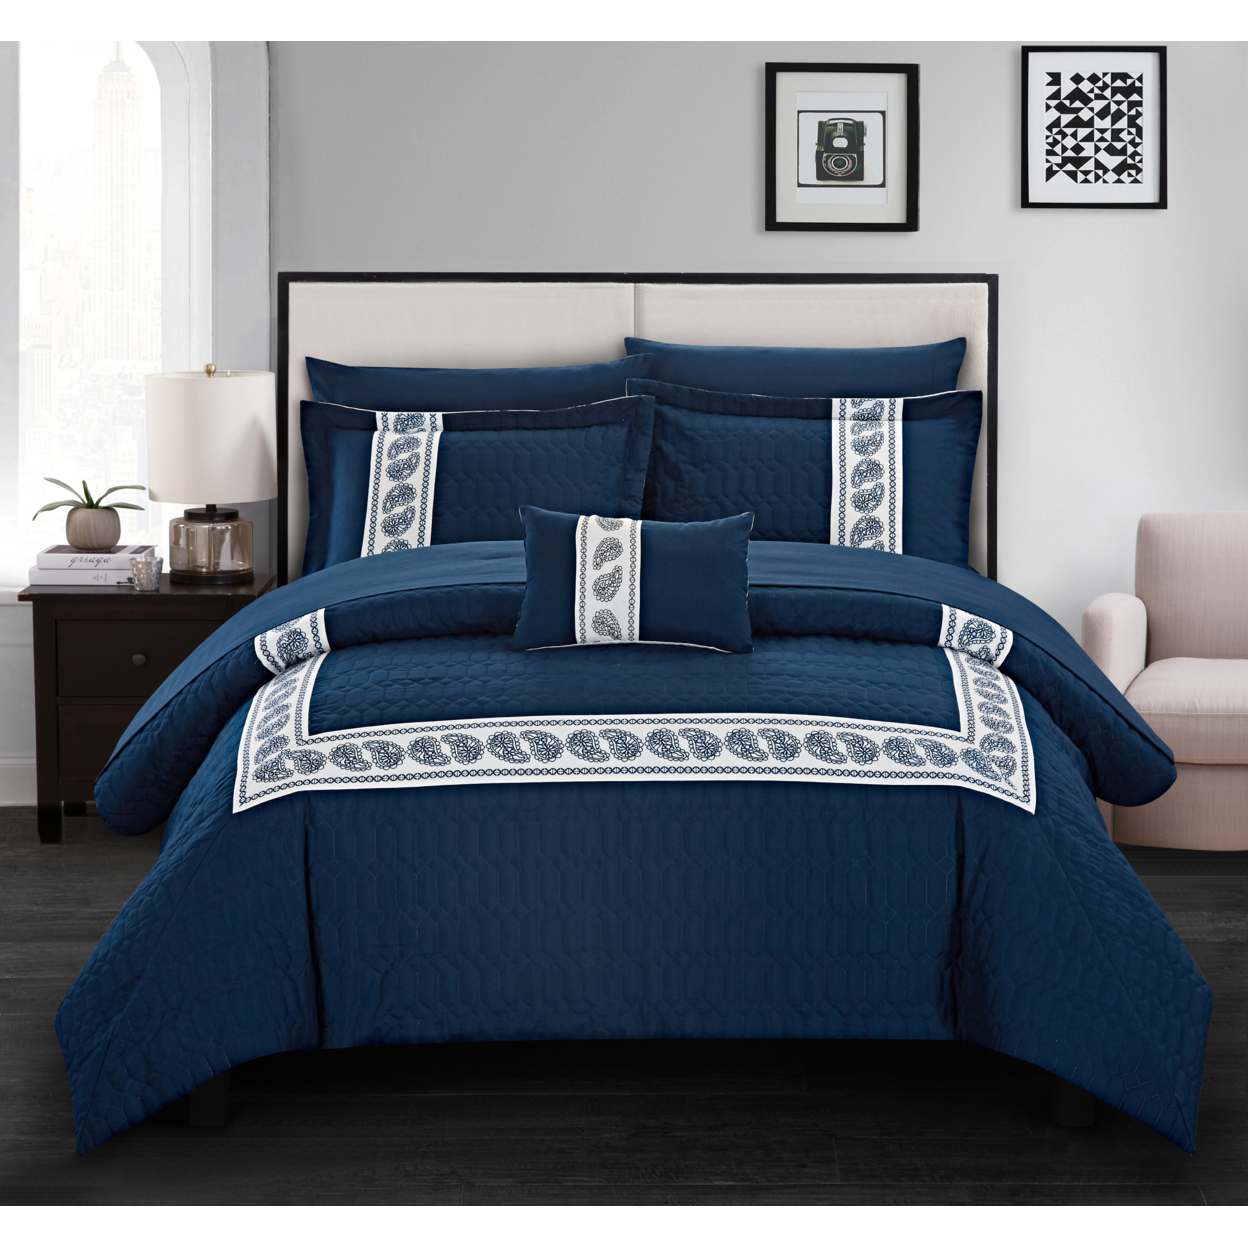 Keegan 8 Or 6 Piece Comforter Set Hotel Collection Hexagon Embossed Paisley Print Border Design Bed In A Bag - Navy, Twin